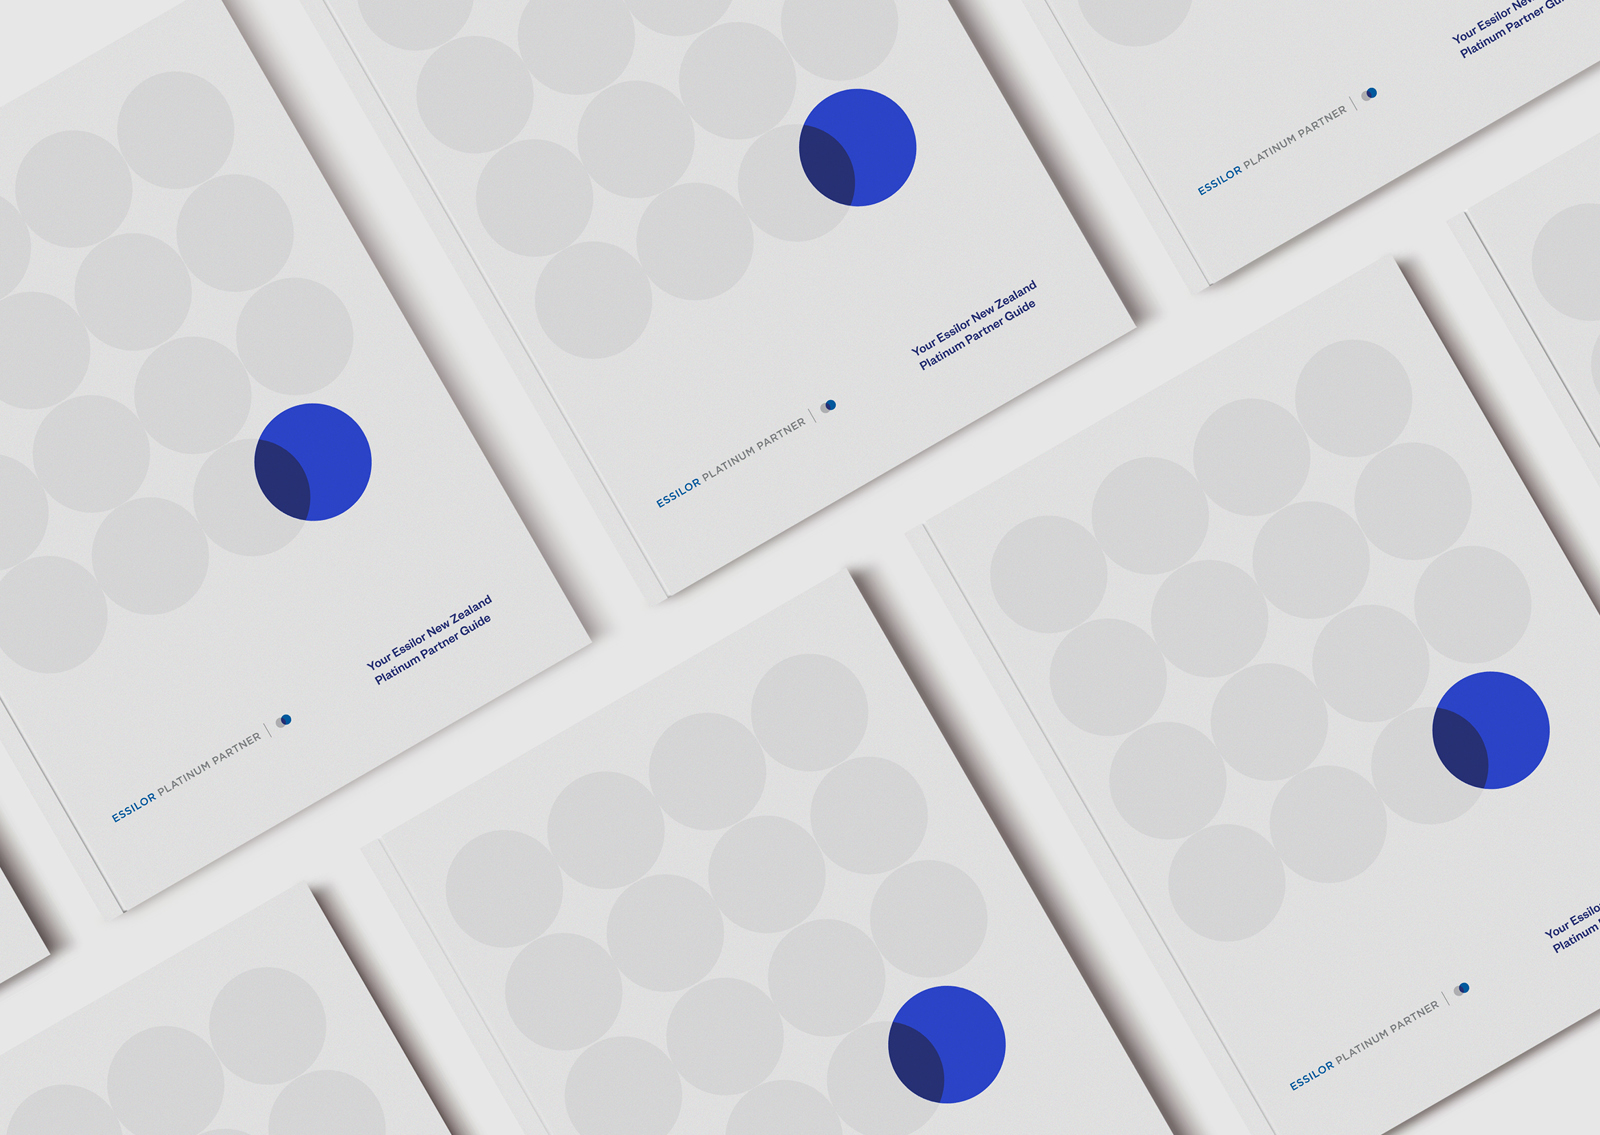 Essilor NZ Platinum Partners brochure – multiple front covers featuring series of circles and cobalt blue overlap